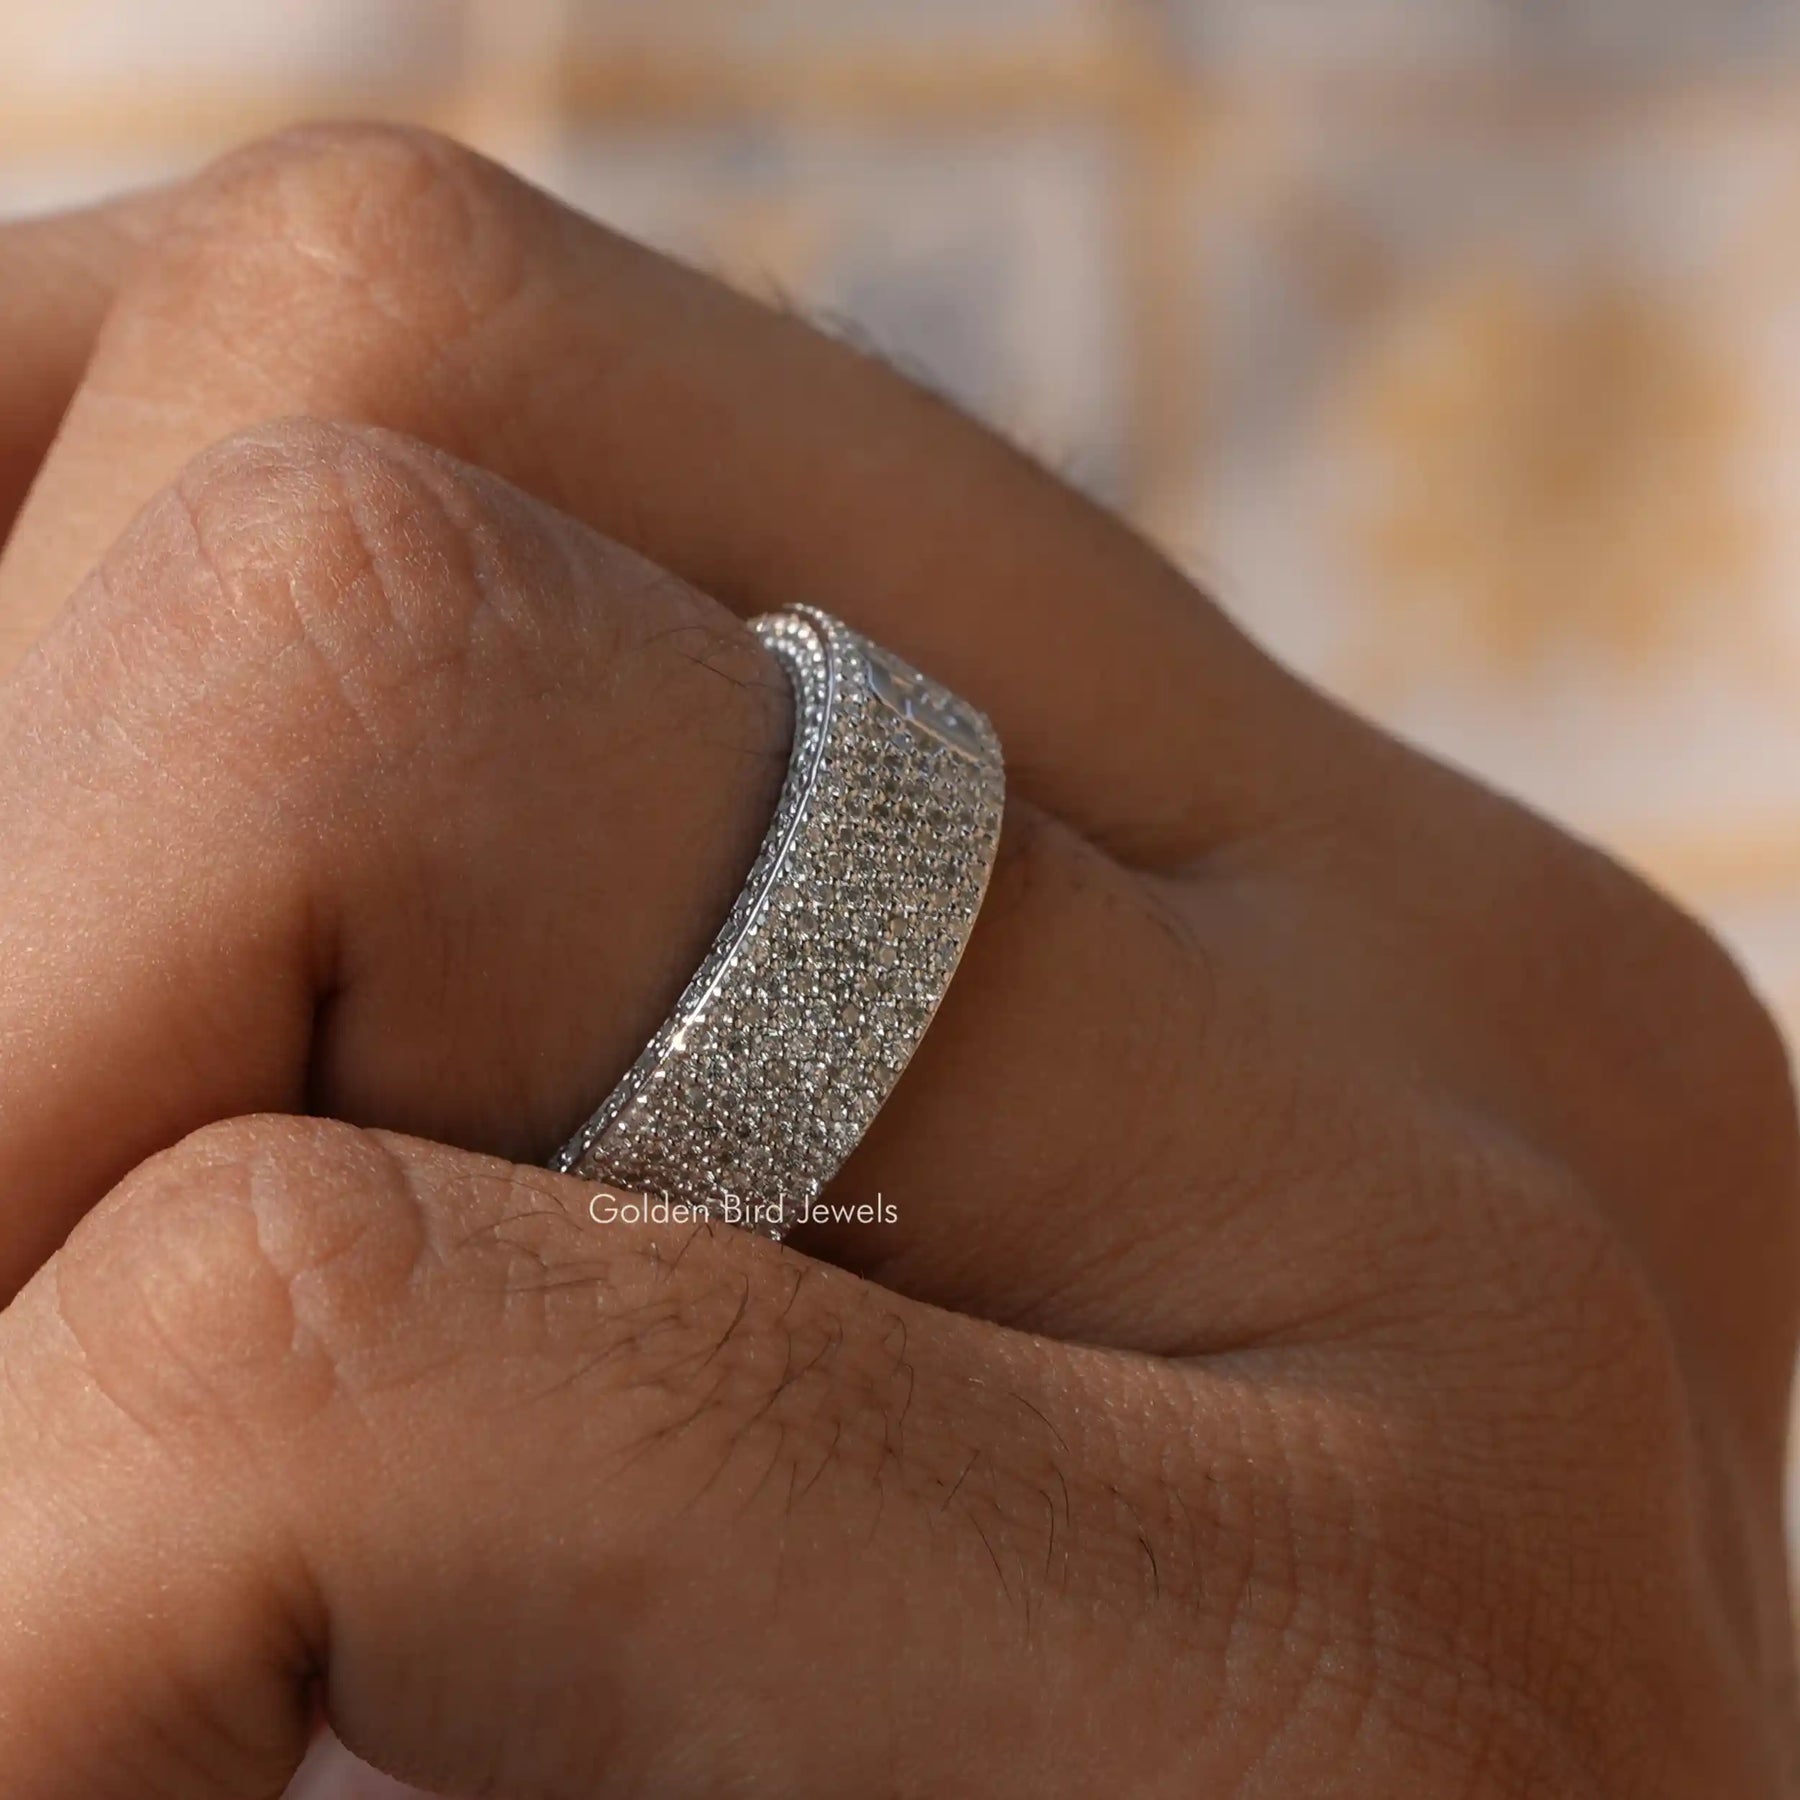 [In finger side view of round cut eternity wedding band]-[Golden Bird Jewels]